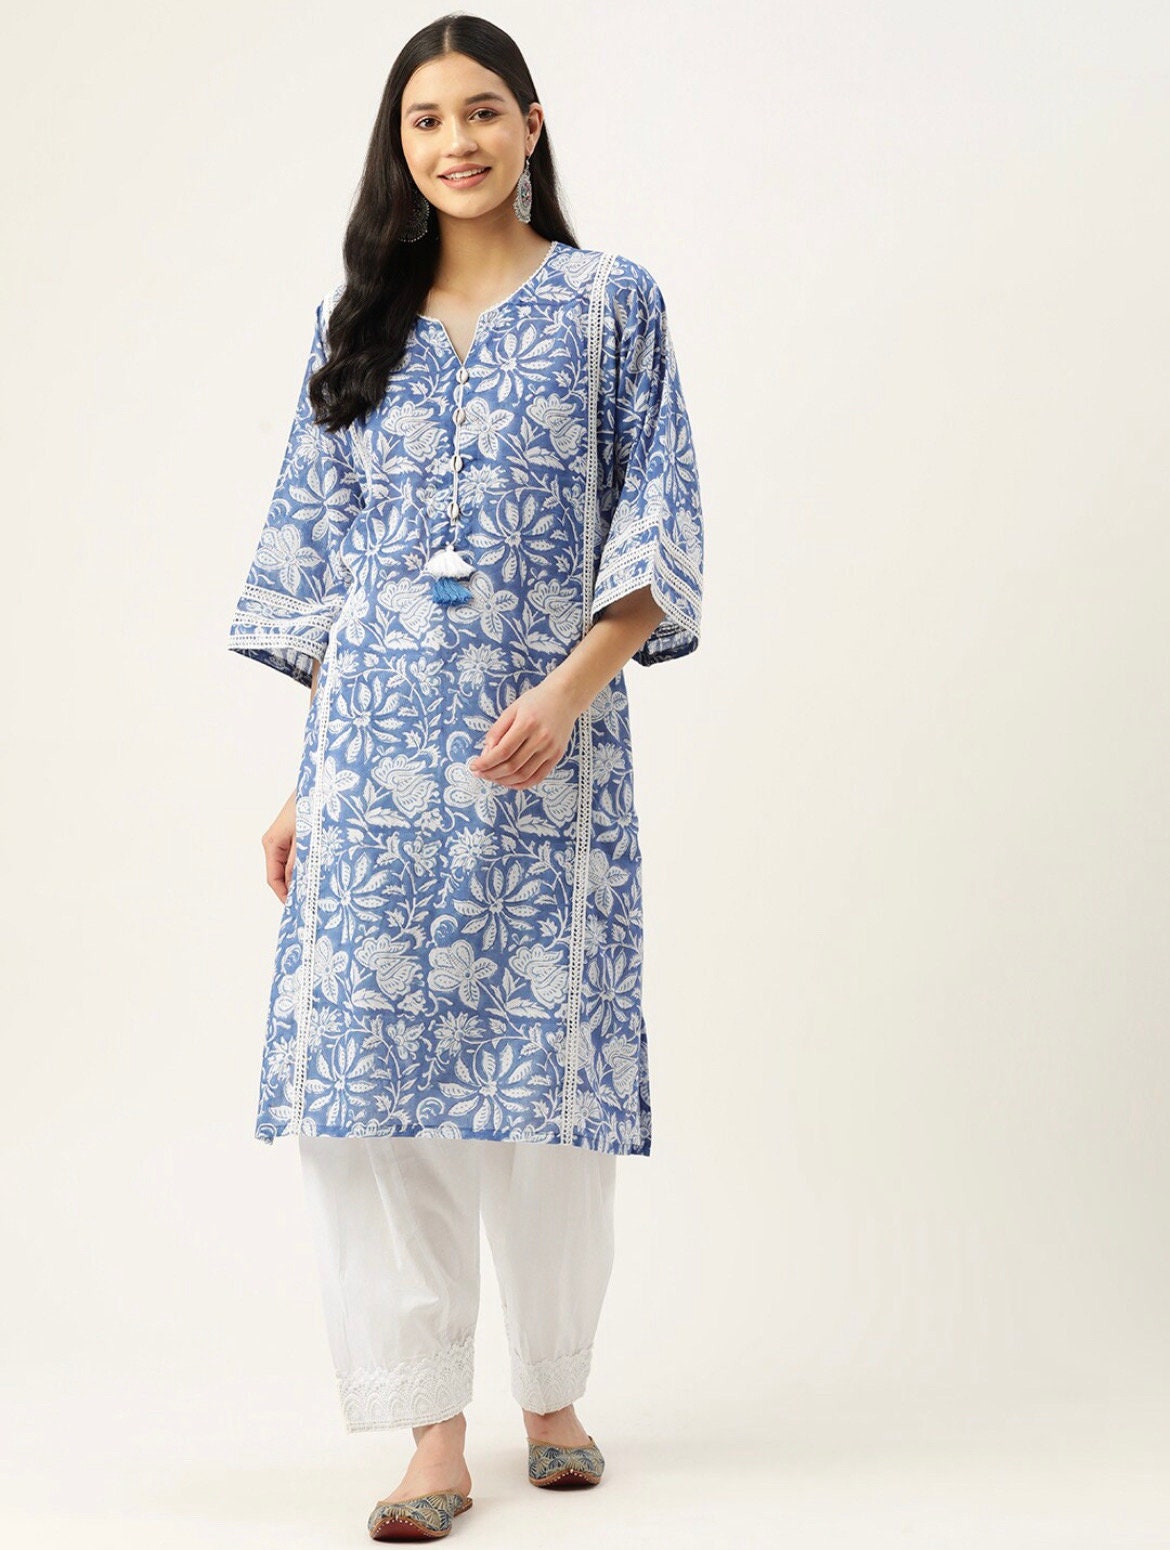 Hand Woven Hand Print Kurtis Online Shopping for Women at Low Prices